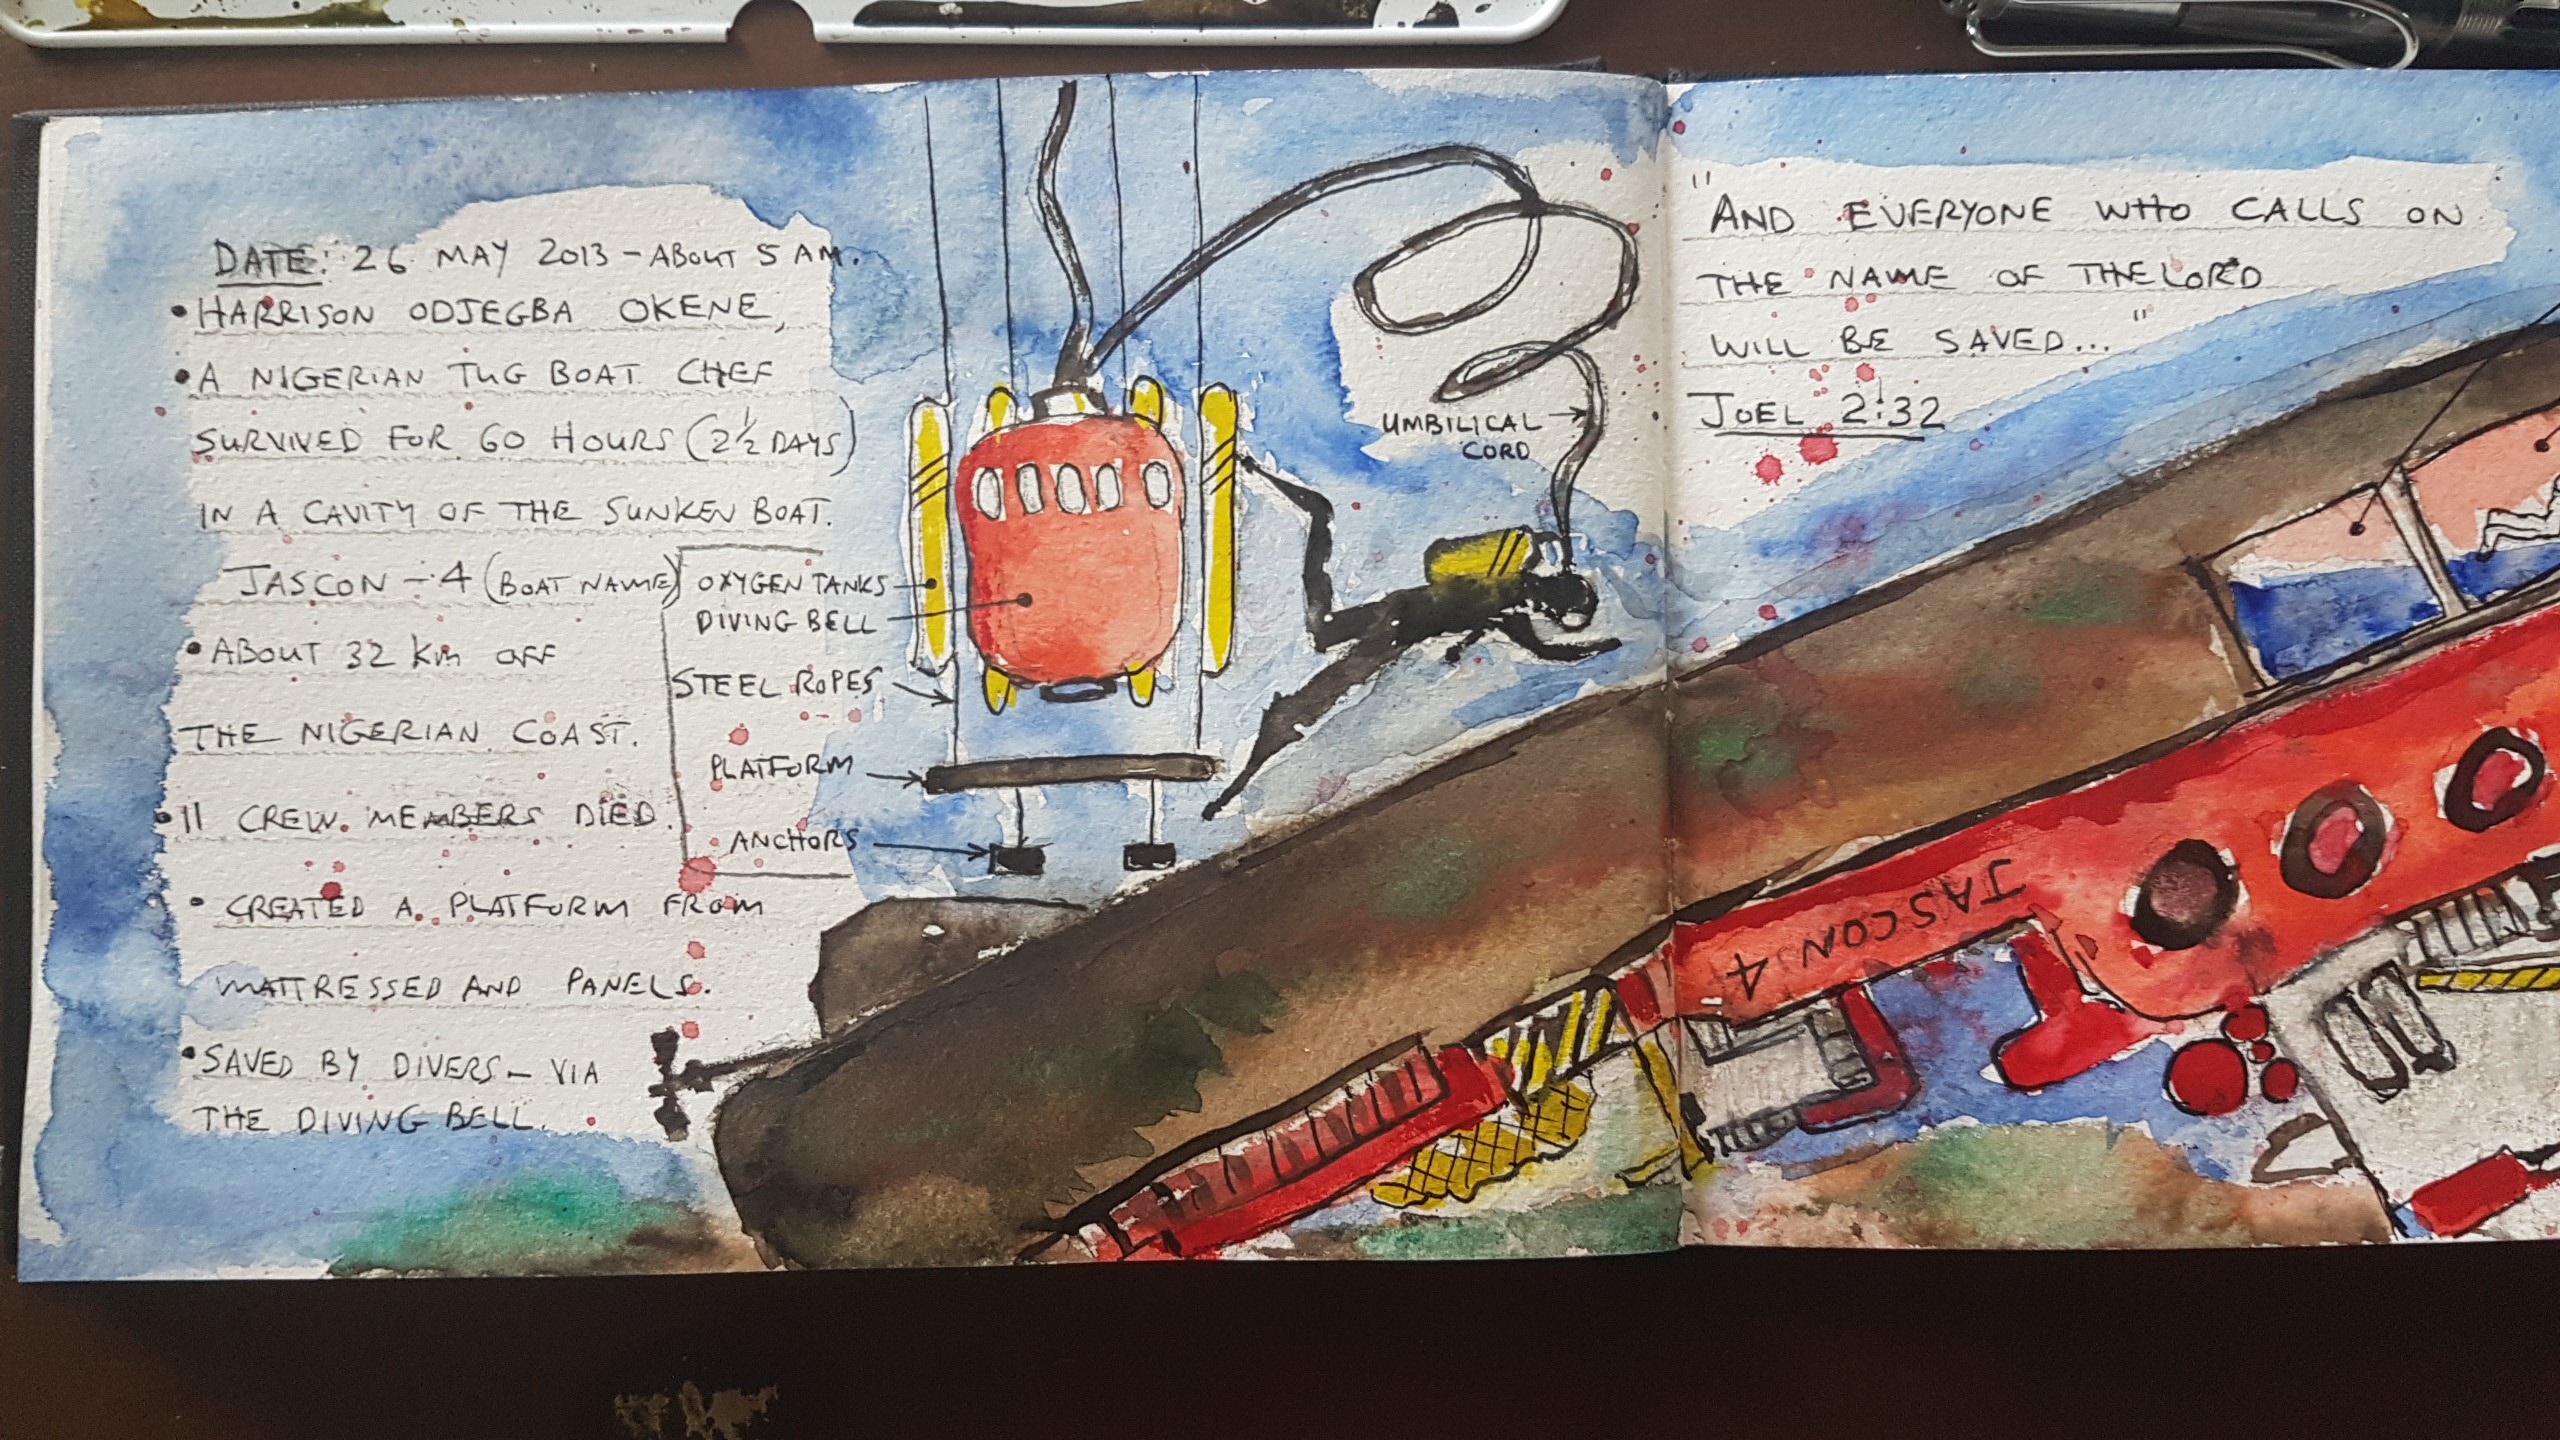 From my sketchbook: Notes and facts jotted down in the sketchbook on the far left. The diving bell is in the middle of the page. Some reporters indicated that the tugboat was suspended at 30 m below the surface because of the air pocket. Credit: Author.